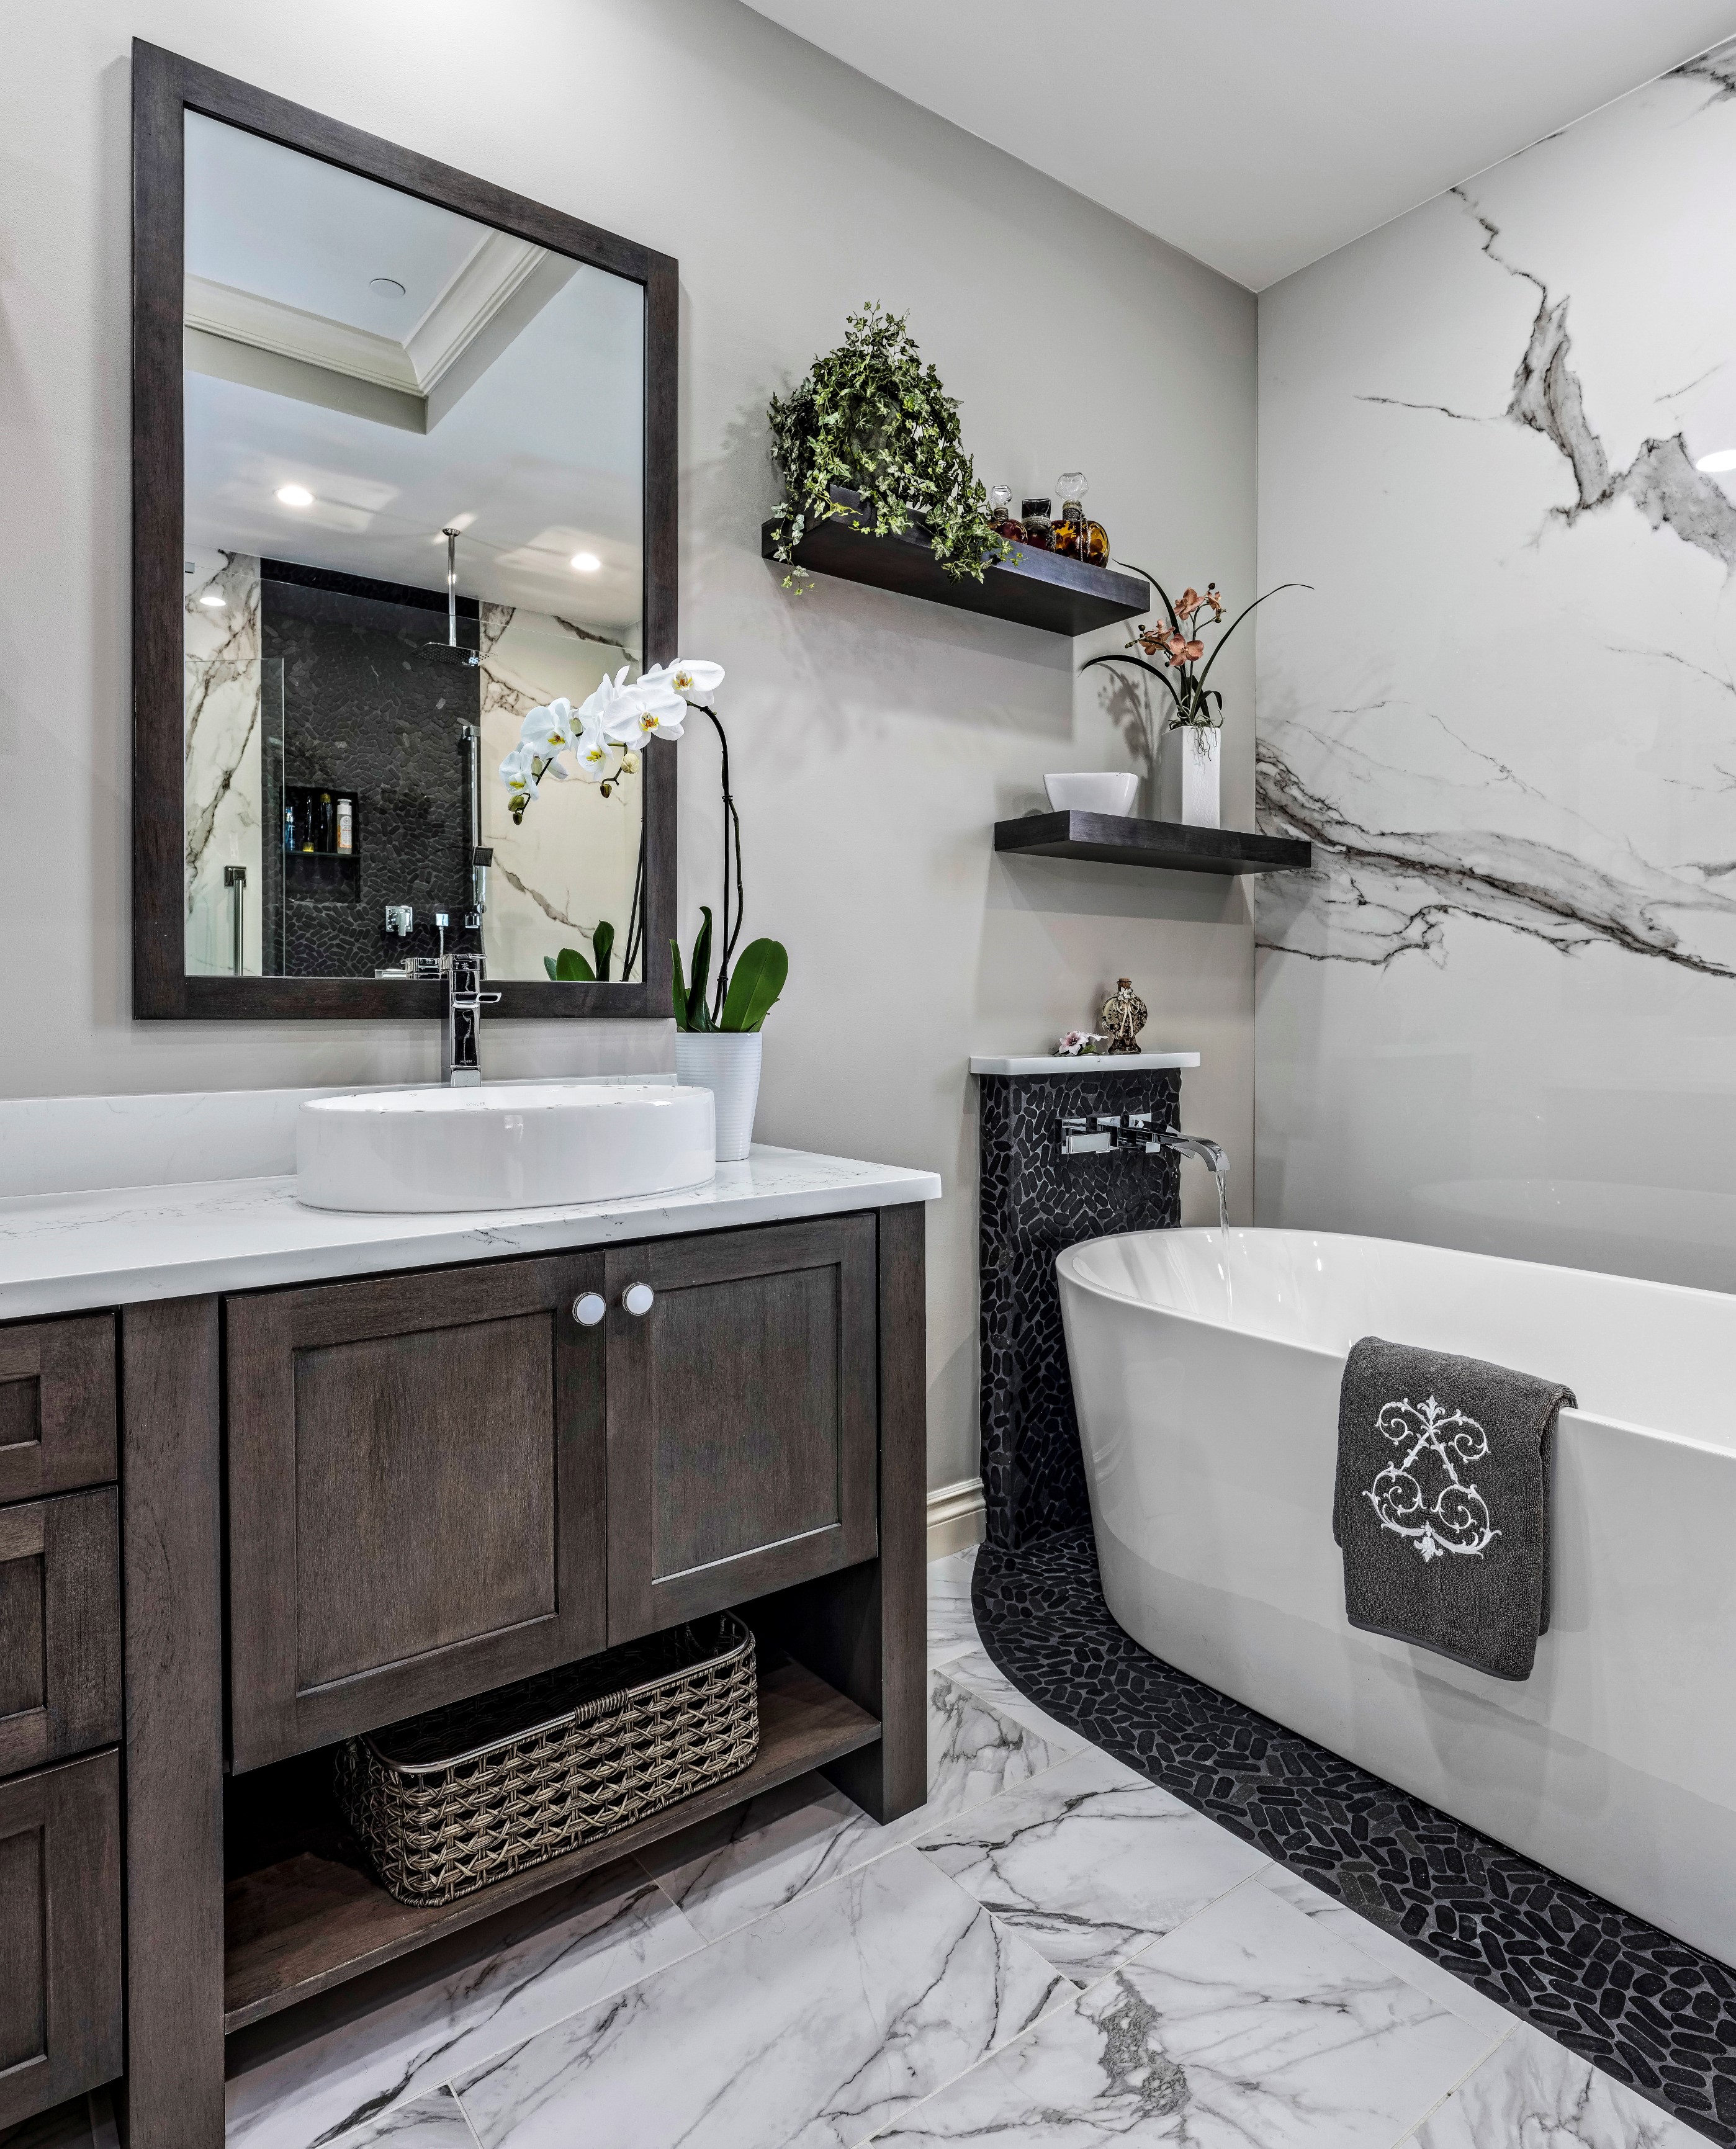 Bathroom Remodeling Typically Cost, How Much Does It Cost To Remodel A Bathroom In California